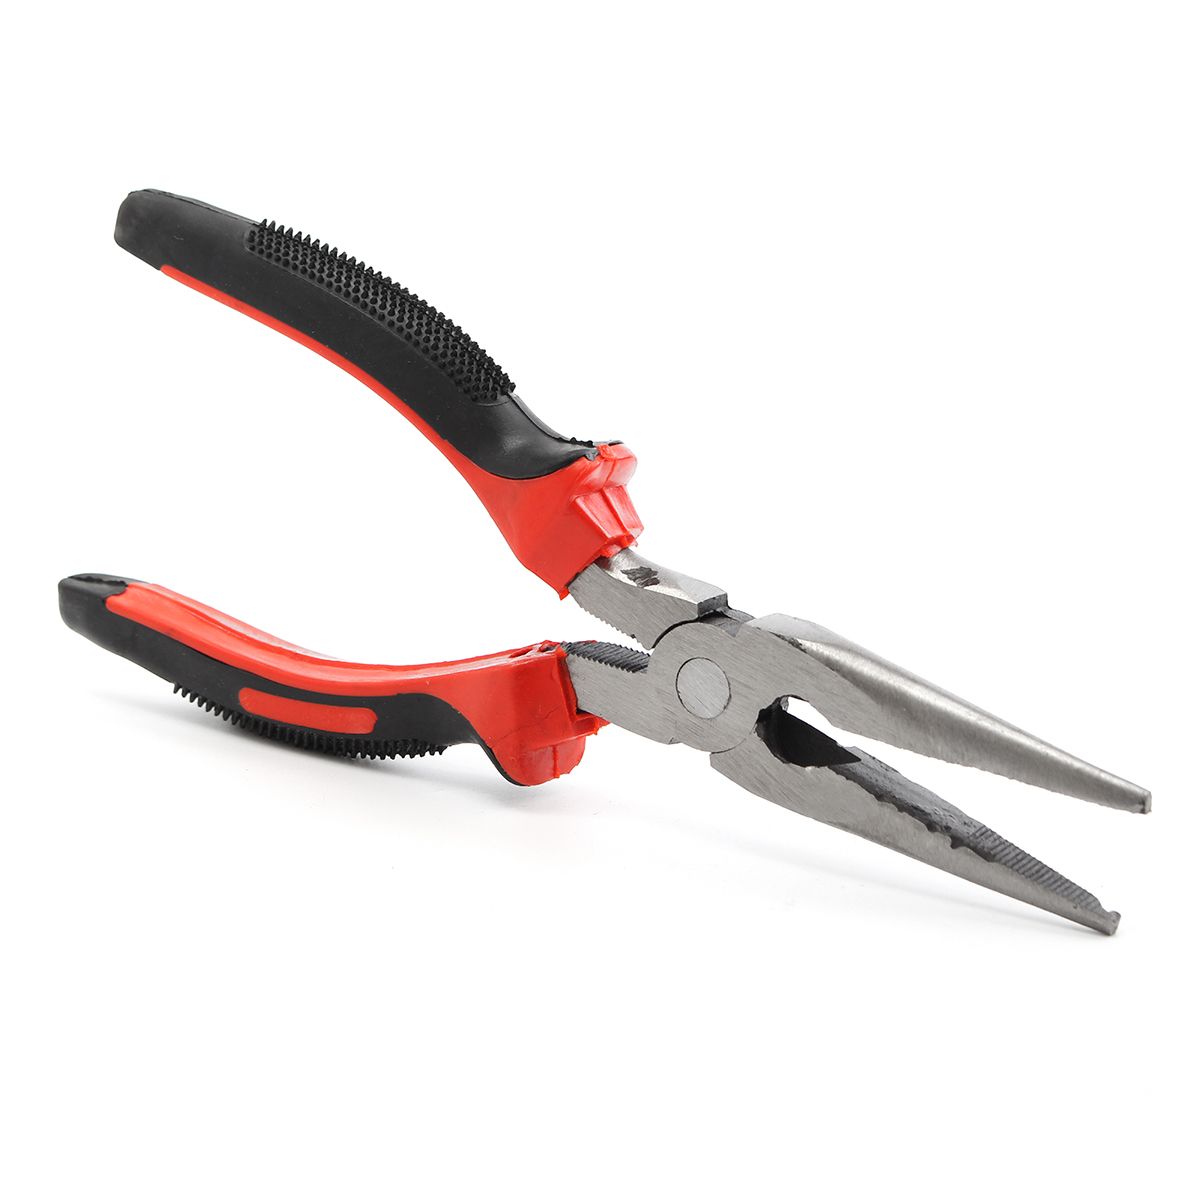 3Pcs-8inch-inch-Heavy-Duty-Long-Nose-Combination-Cutter-Plier-All-Purpose-1130305